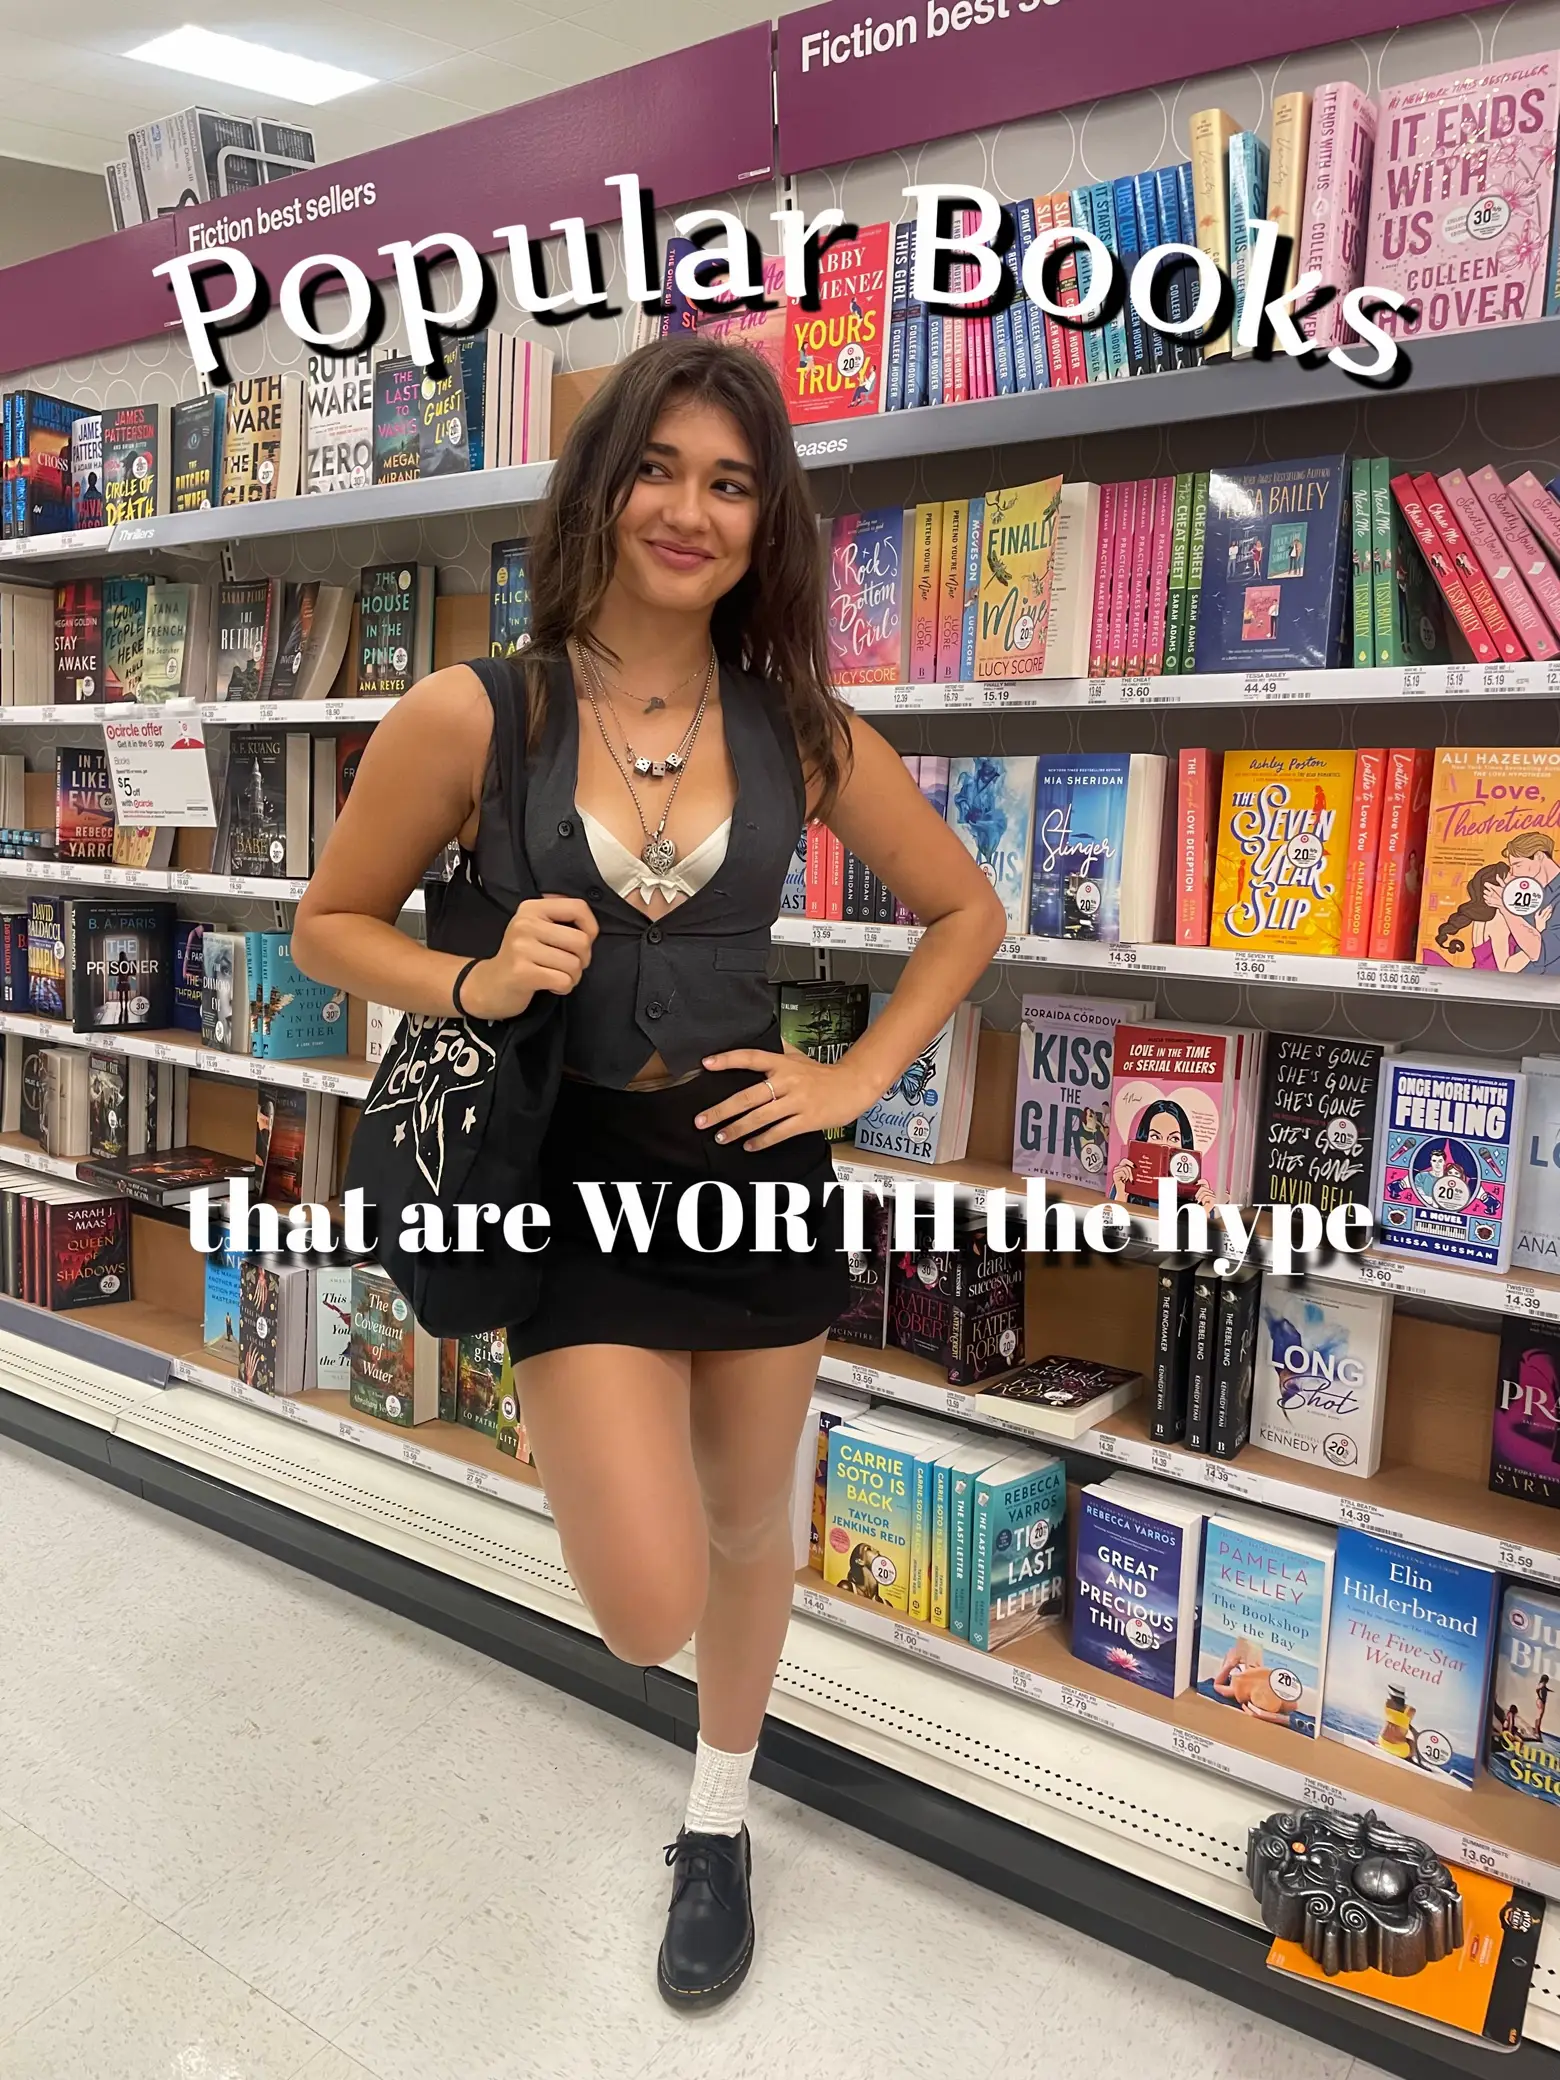  A woman wearing a black dress and a necklace is standing in a bookstore. She is holding a purse and has her hand on her hip. The store has a variety of books on display, with some placed in the foreground and others in the background. The woman appears to be posing for a picture in the store, and the books are arranged in a way that they are easily visible. The woman is smiling and appears to be enjoying her time in the store.